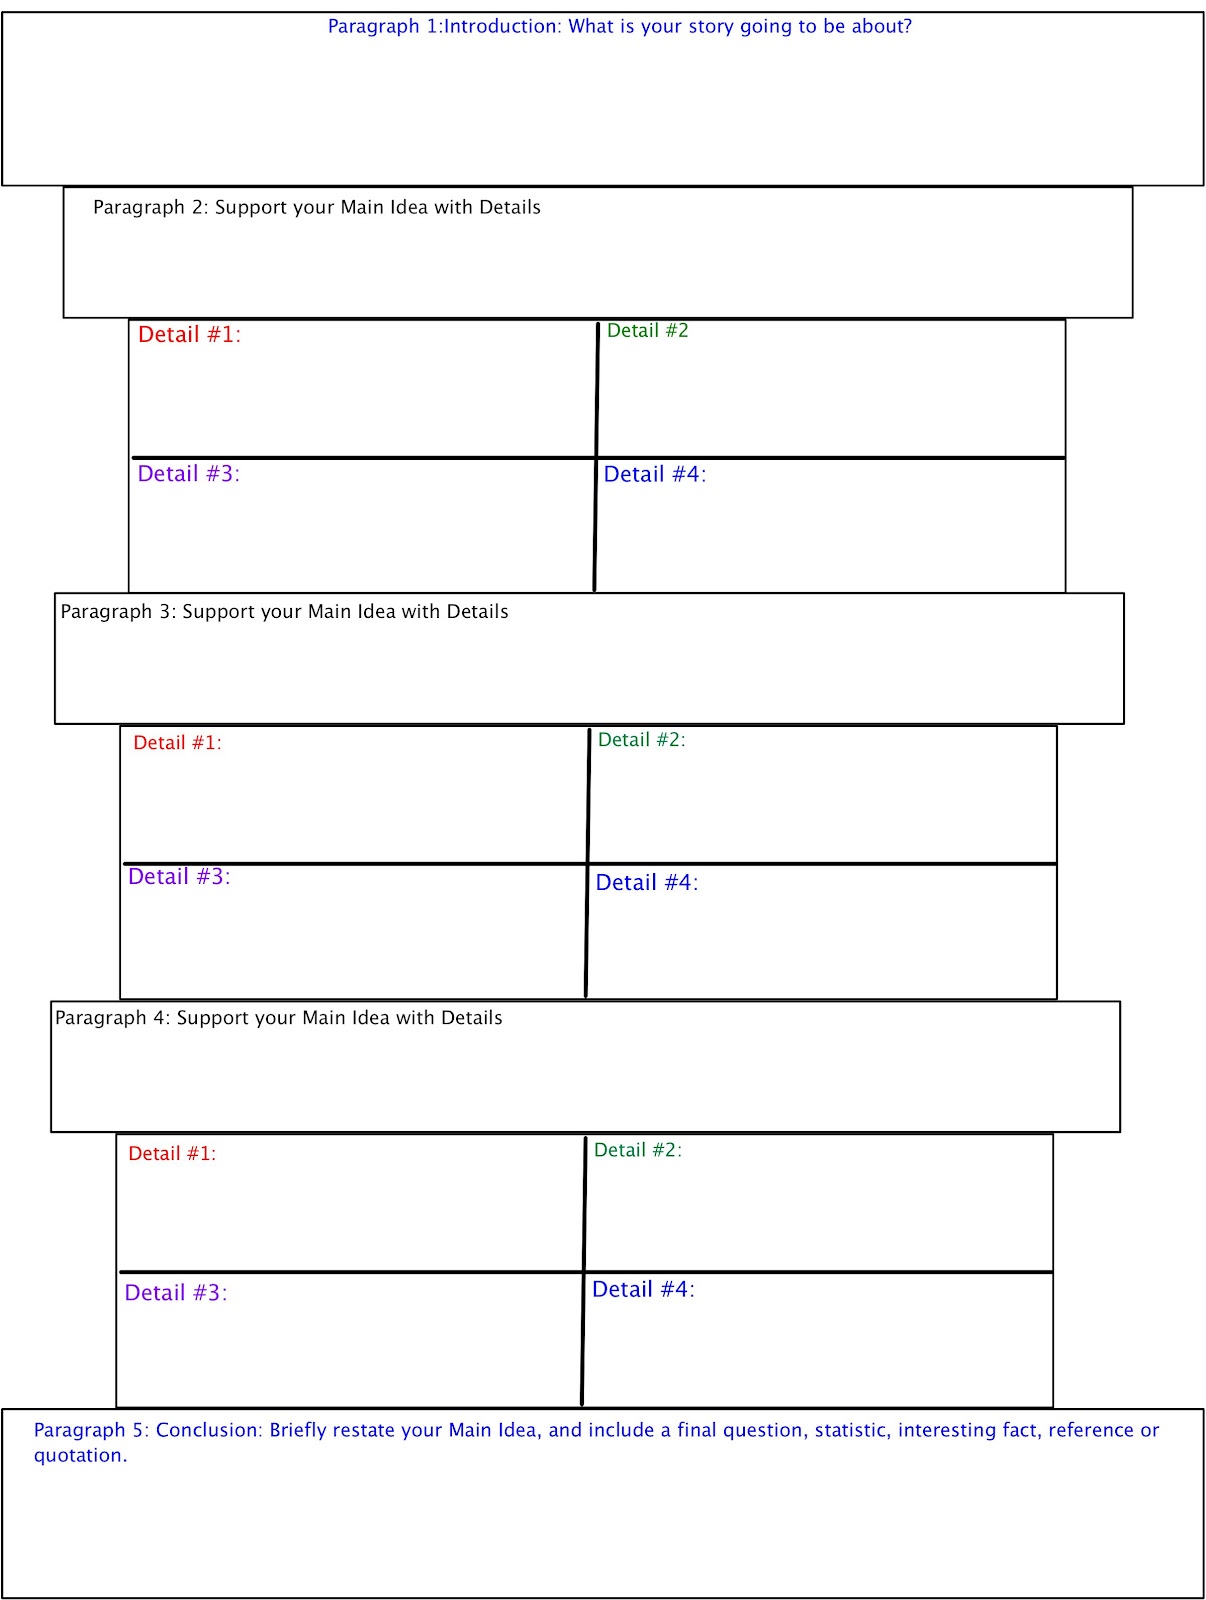 Teaching and Learning with Graphic Organizers